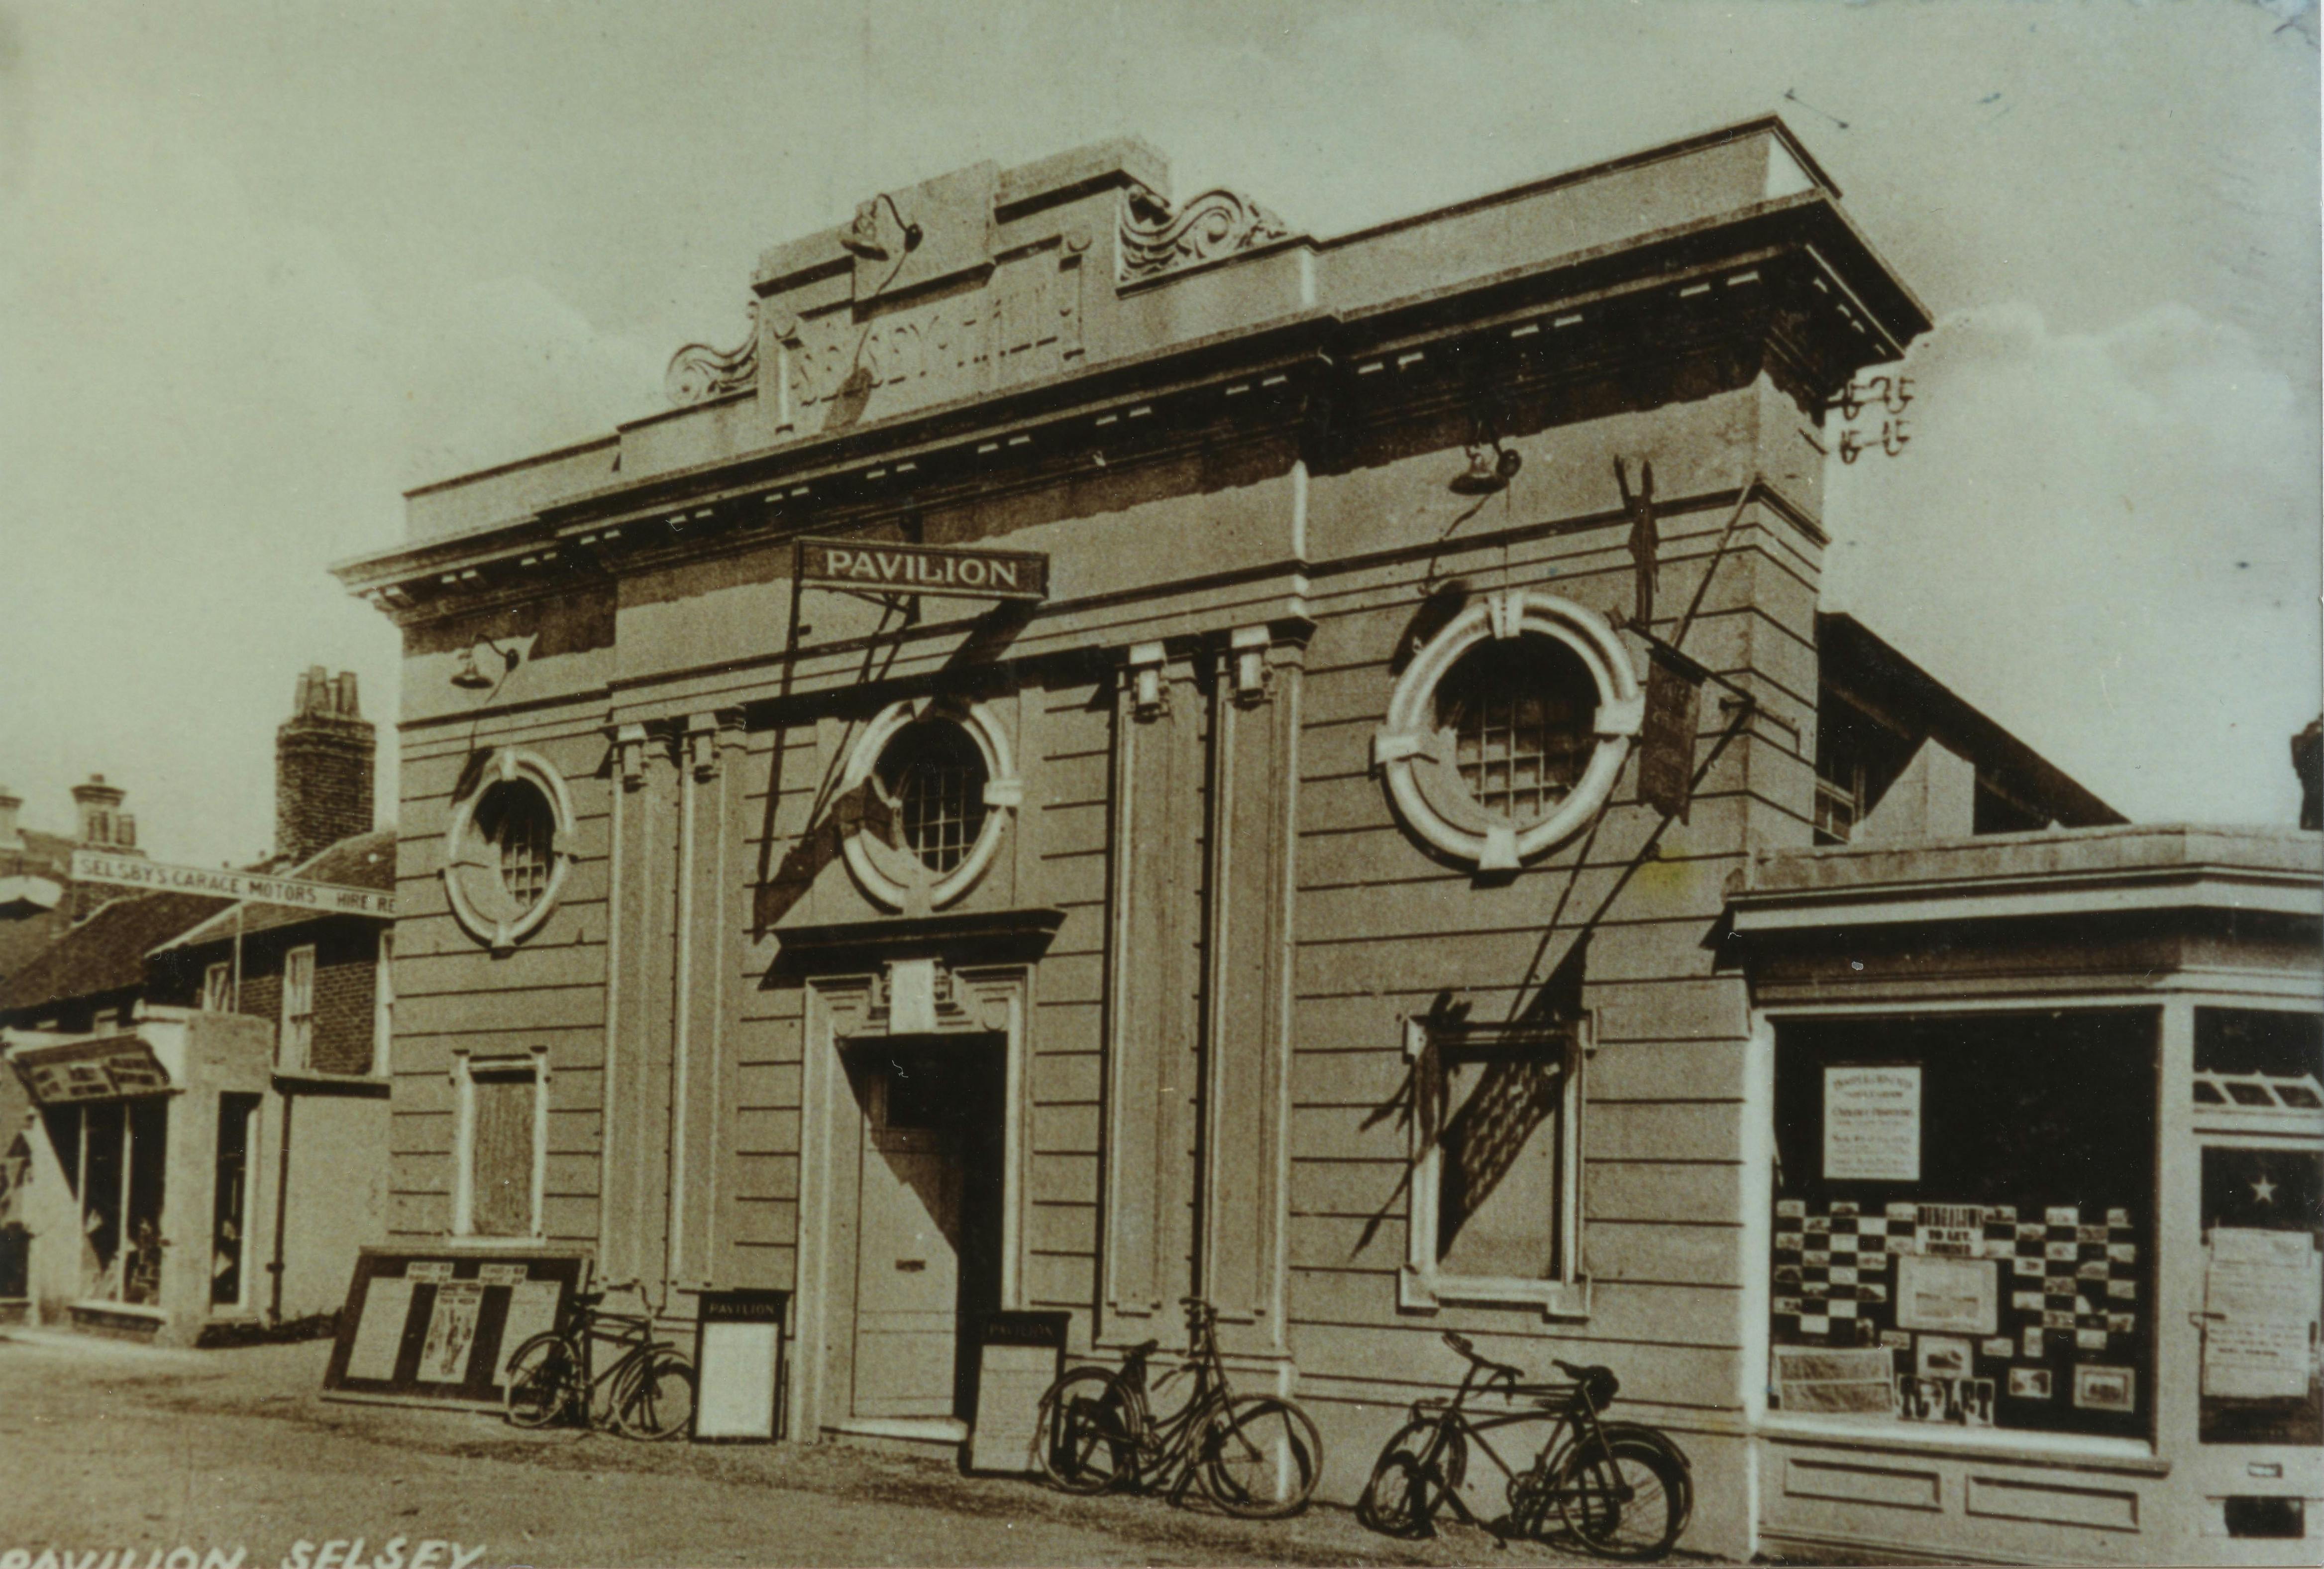 Image of the Selsey Pavilion taken in the High Street during the war years with bicycles leaning against the builiding